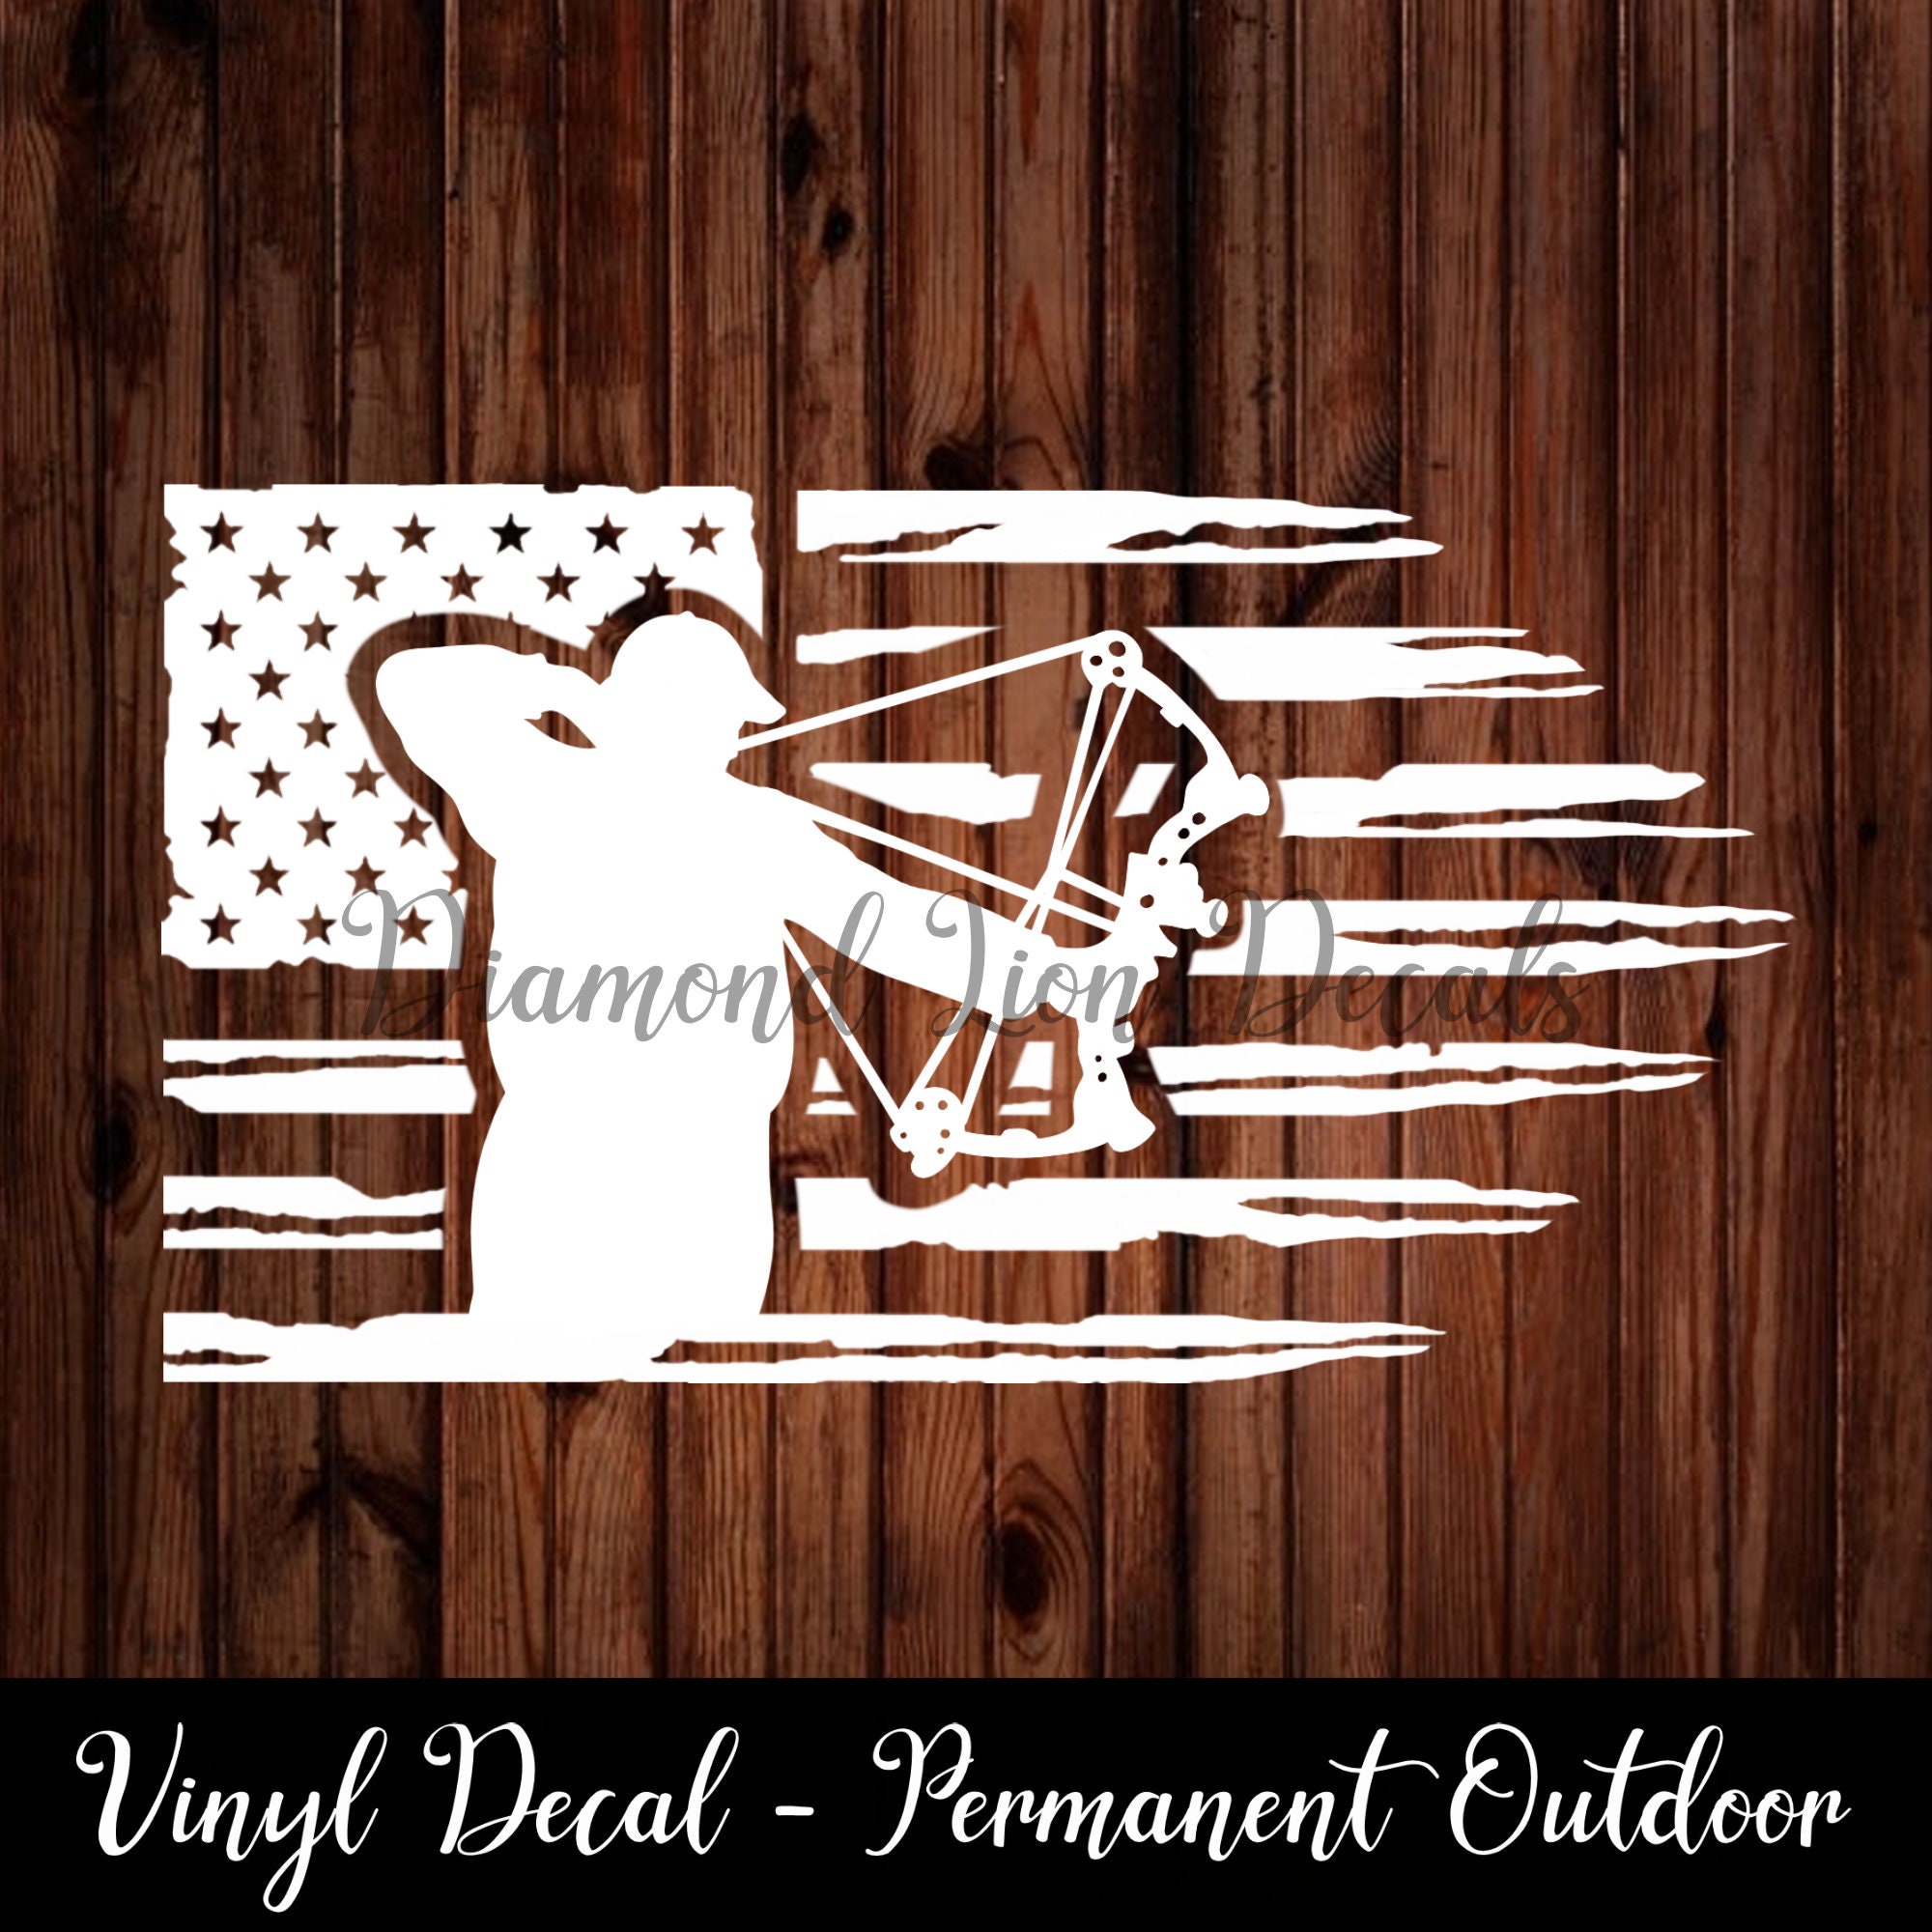 Mountains, Deer, Ocean, Religious, Arrow Decal, Hunting Decal, God Decal,  Beach Decal, Mountain Love, Hunter Gift, Hiking Gift, Camping Gift 